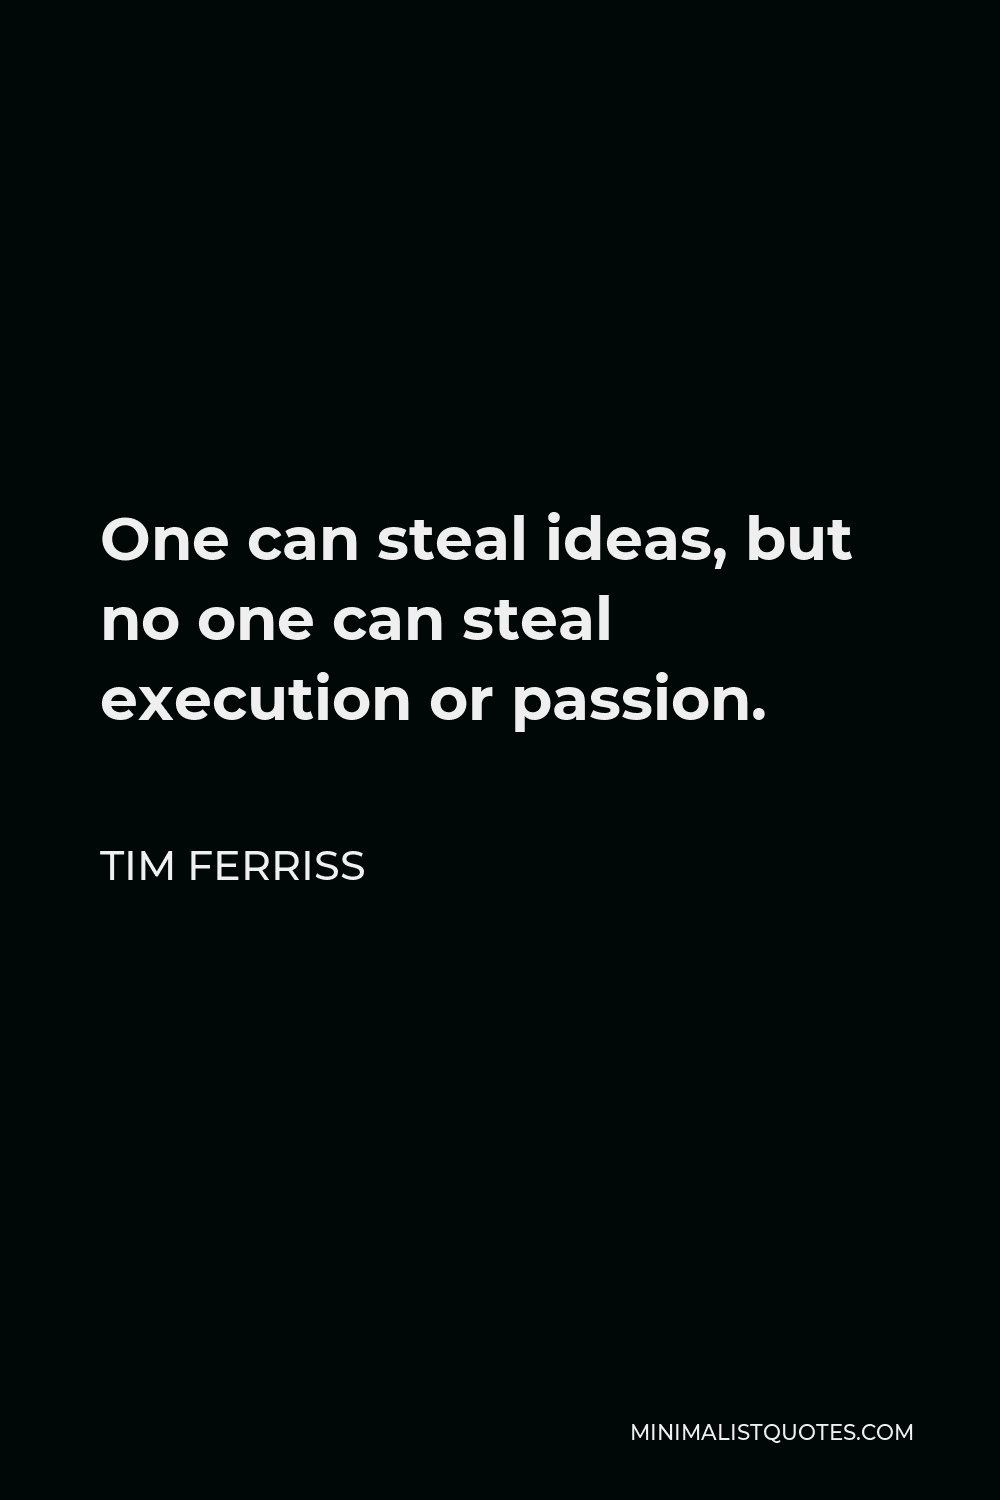 Tim Ferriss Quote - One can steal ideas, but no one can steal execution or passion.